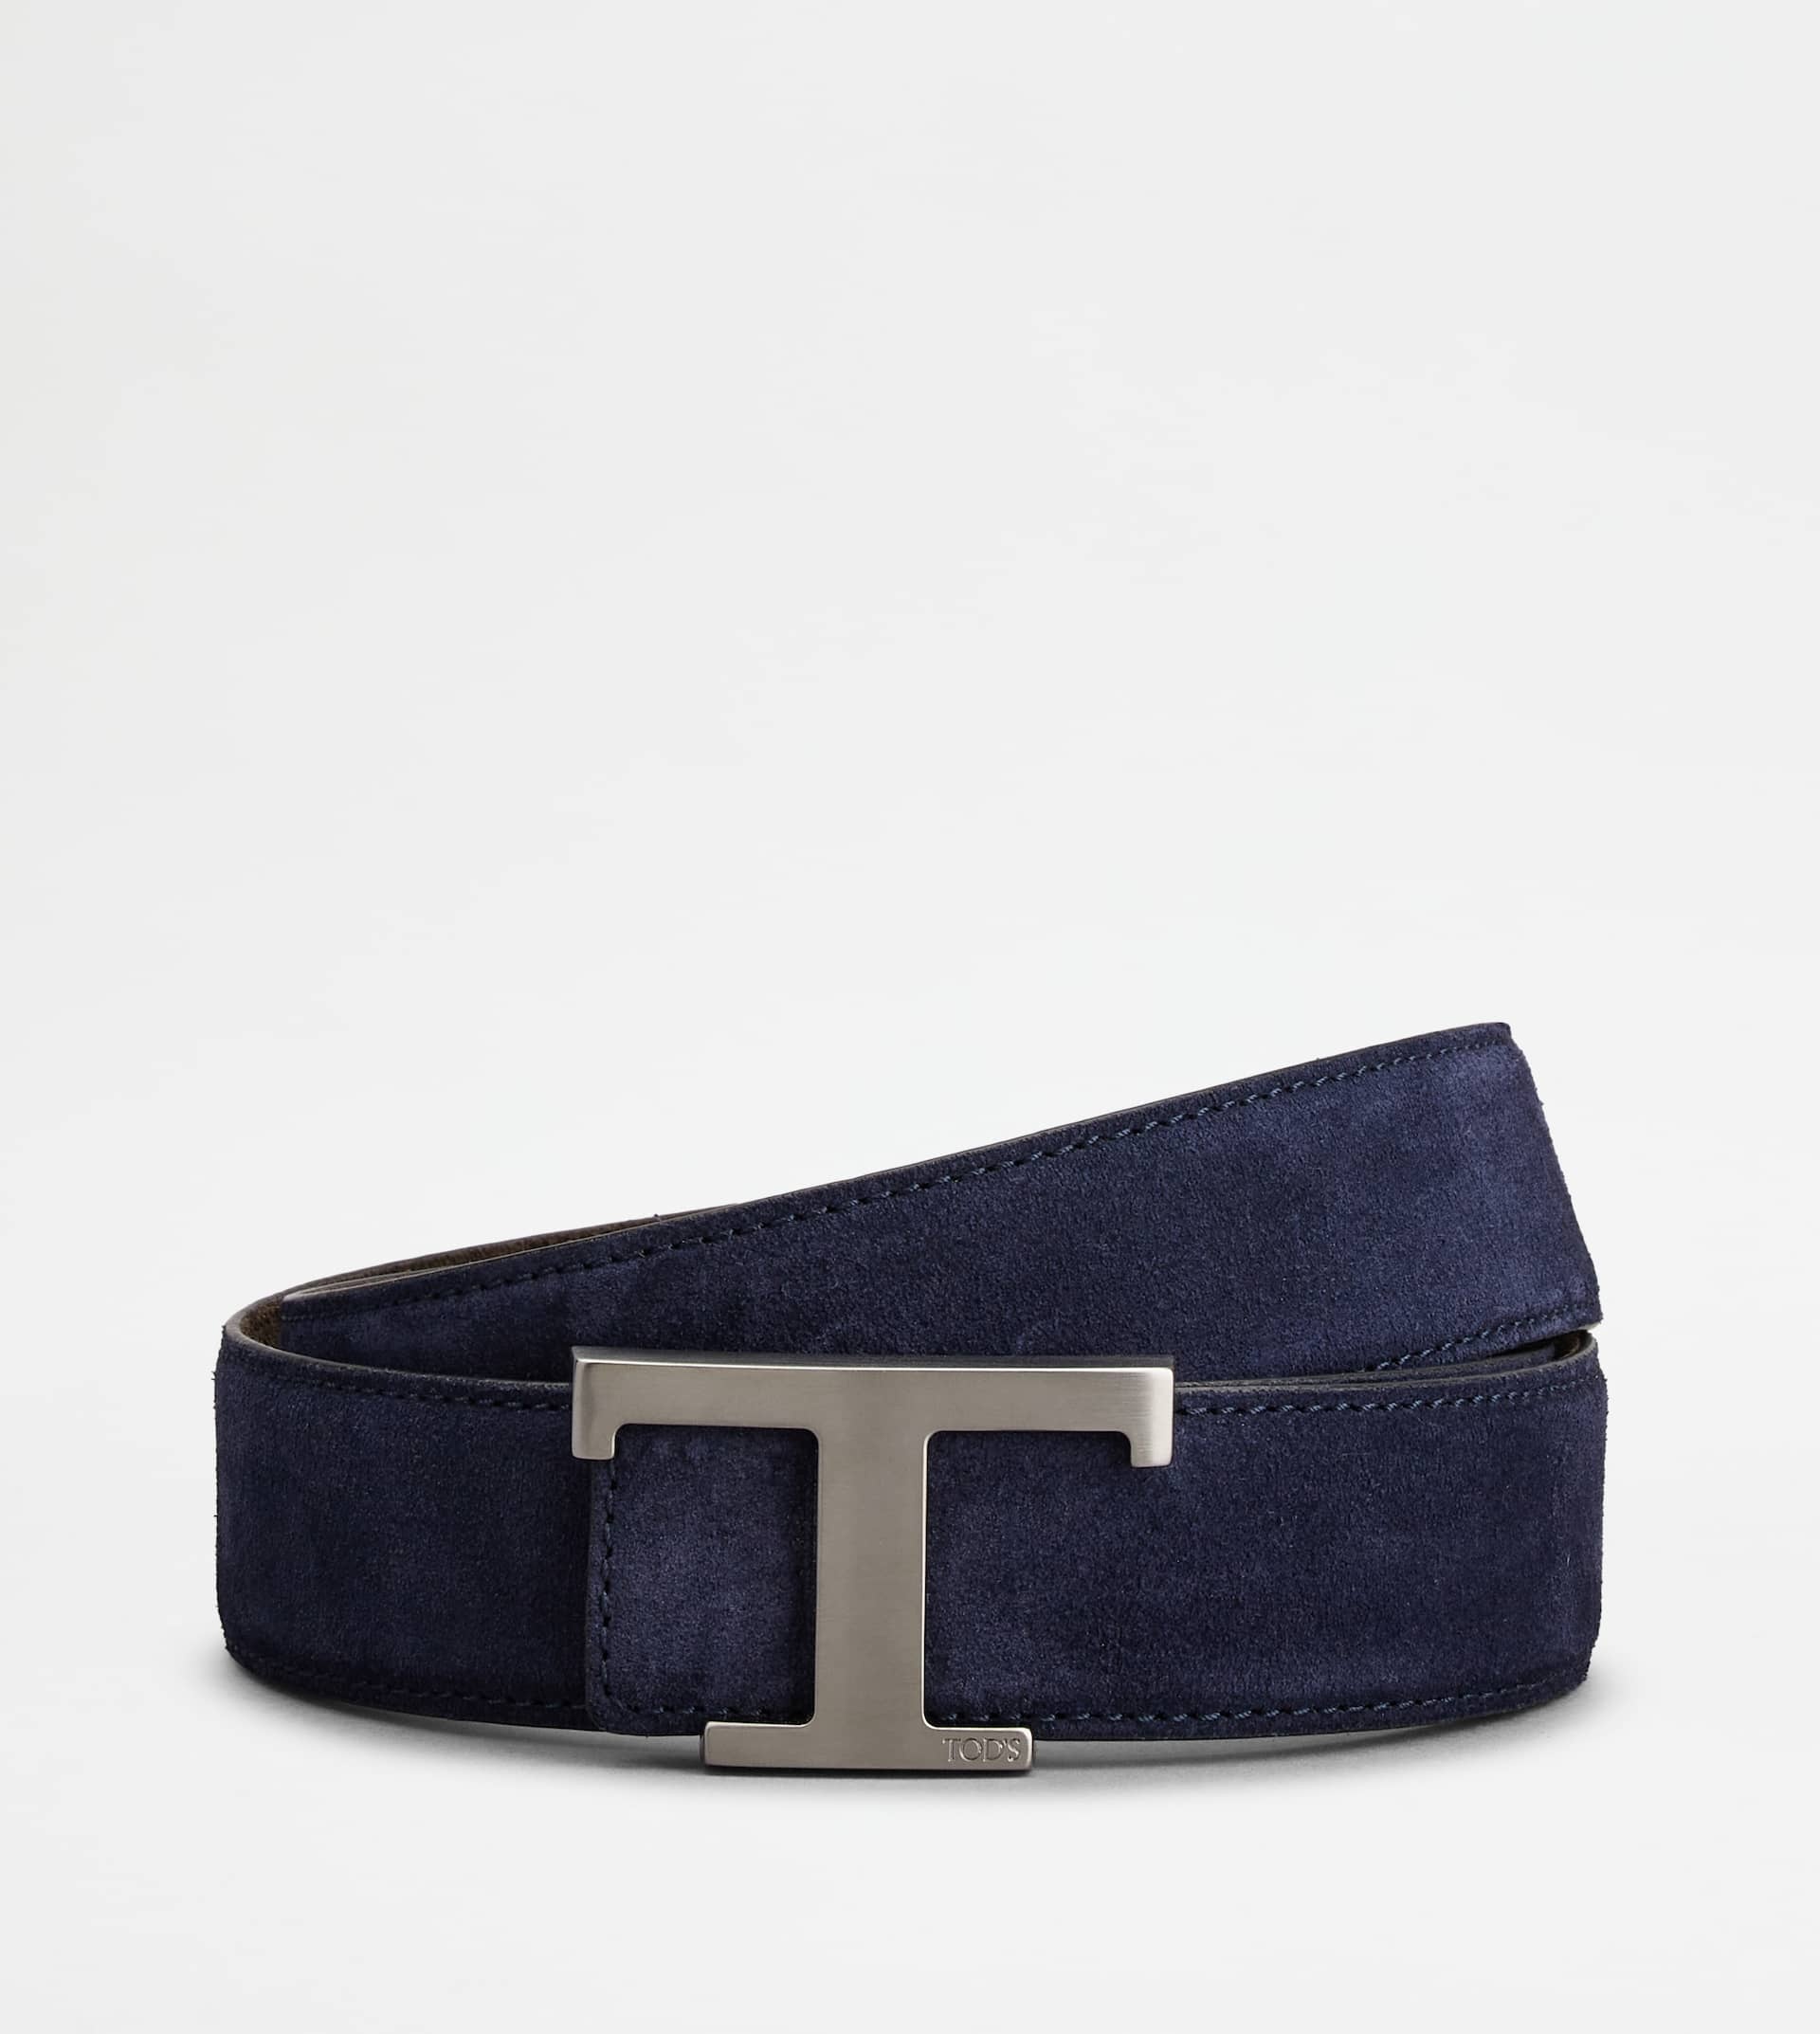 T TIMELESS REVERSIBLE BELT IN SUEDE - BLUE, BROWN - 1